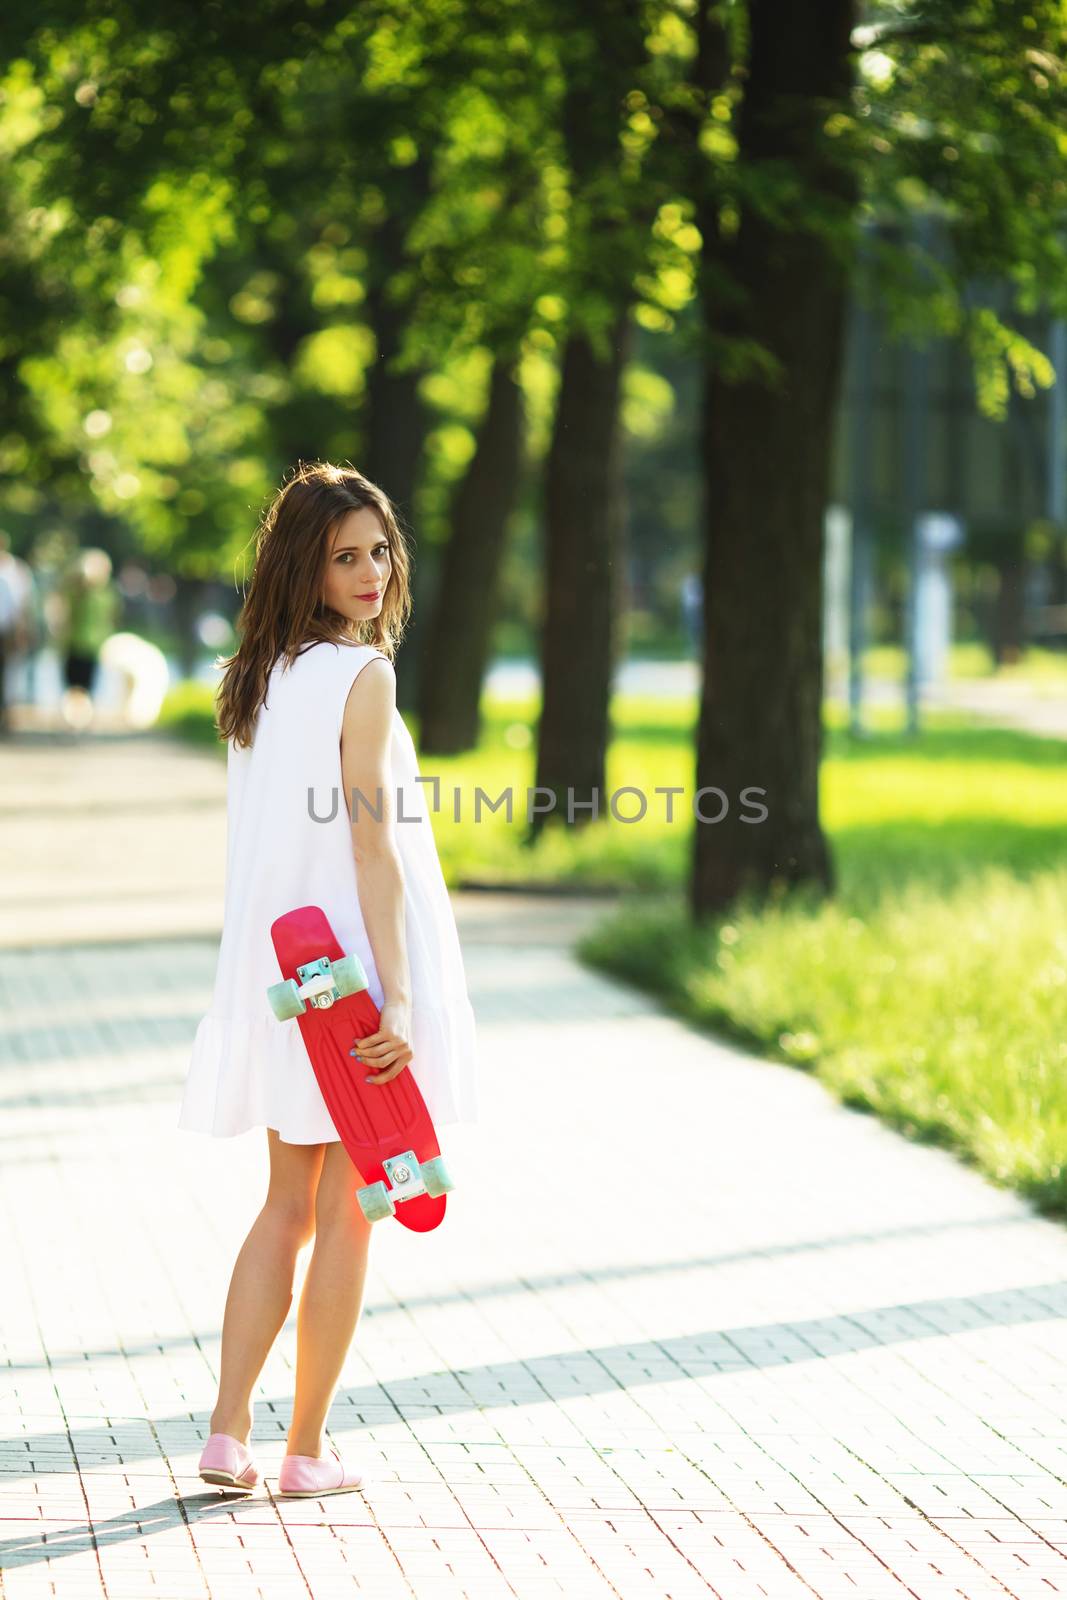 Portrait of lovely urban girl in white dress with a pink skateboard. Happy smiling woman. Girl holding a plastic skate board outdoors. City life.